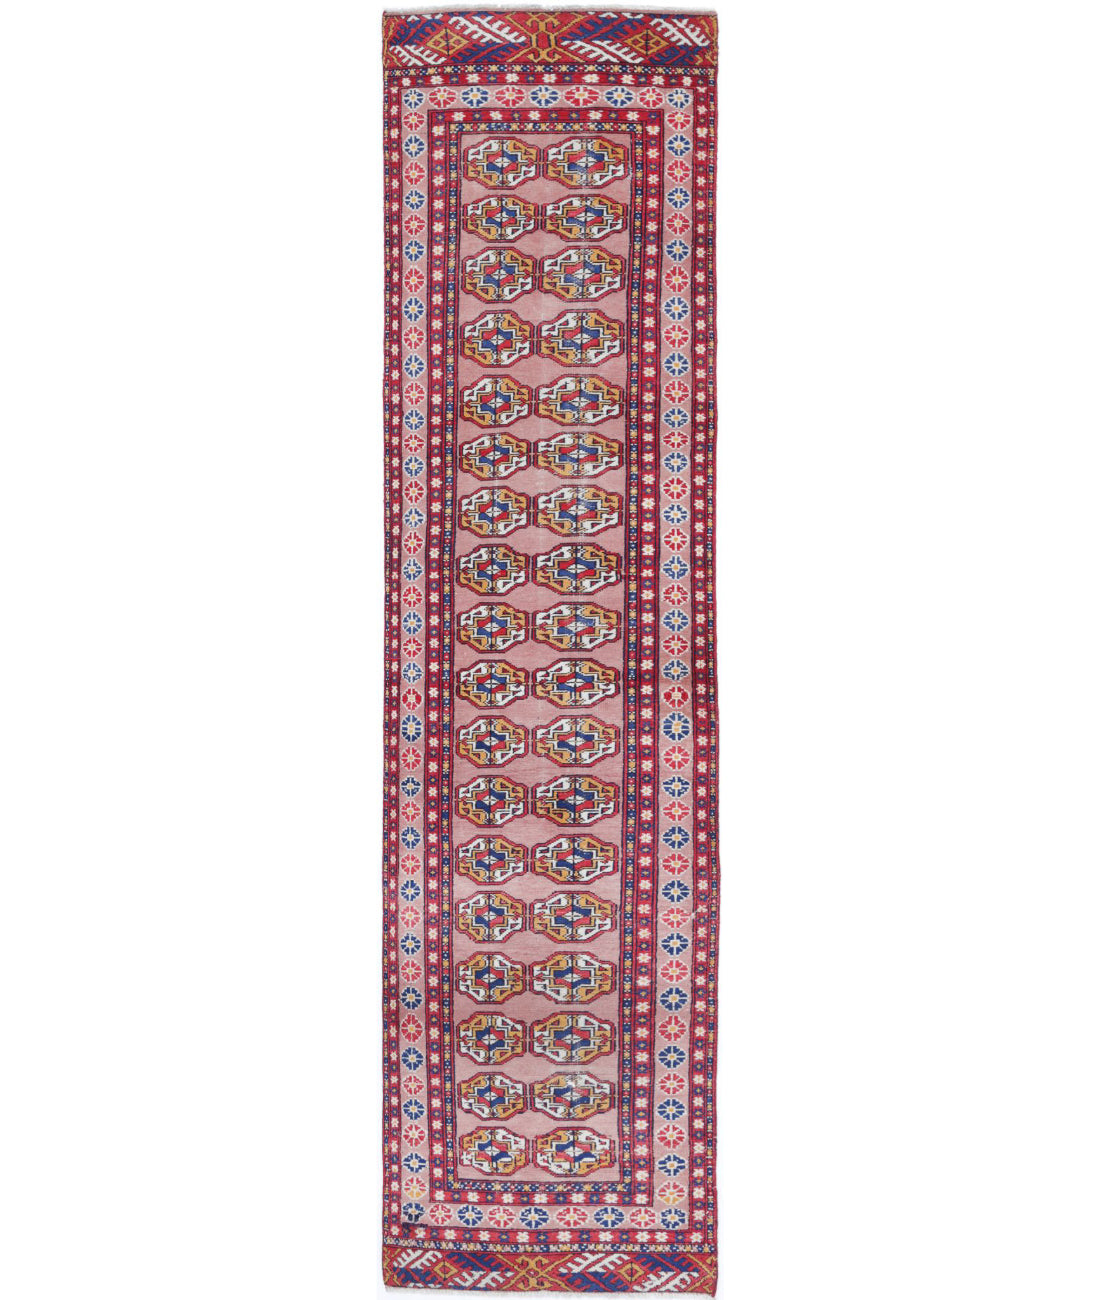 Hand Knotted Tribal Bokhara Wool Rug - 2&#39;4&#39;&#39; x 9&#39;11&#39;&#39; 2&#39;4&#39;&#39; x 9&#39;11&#39;&#39; (70 X 298) / Peach / Red